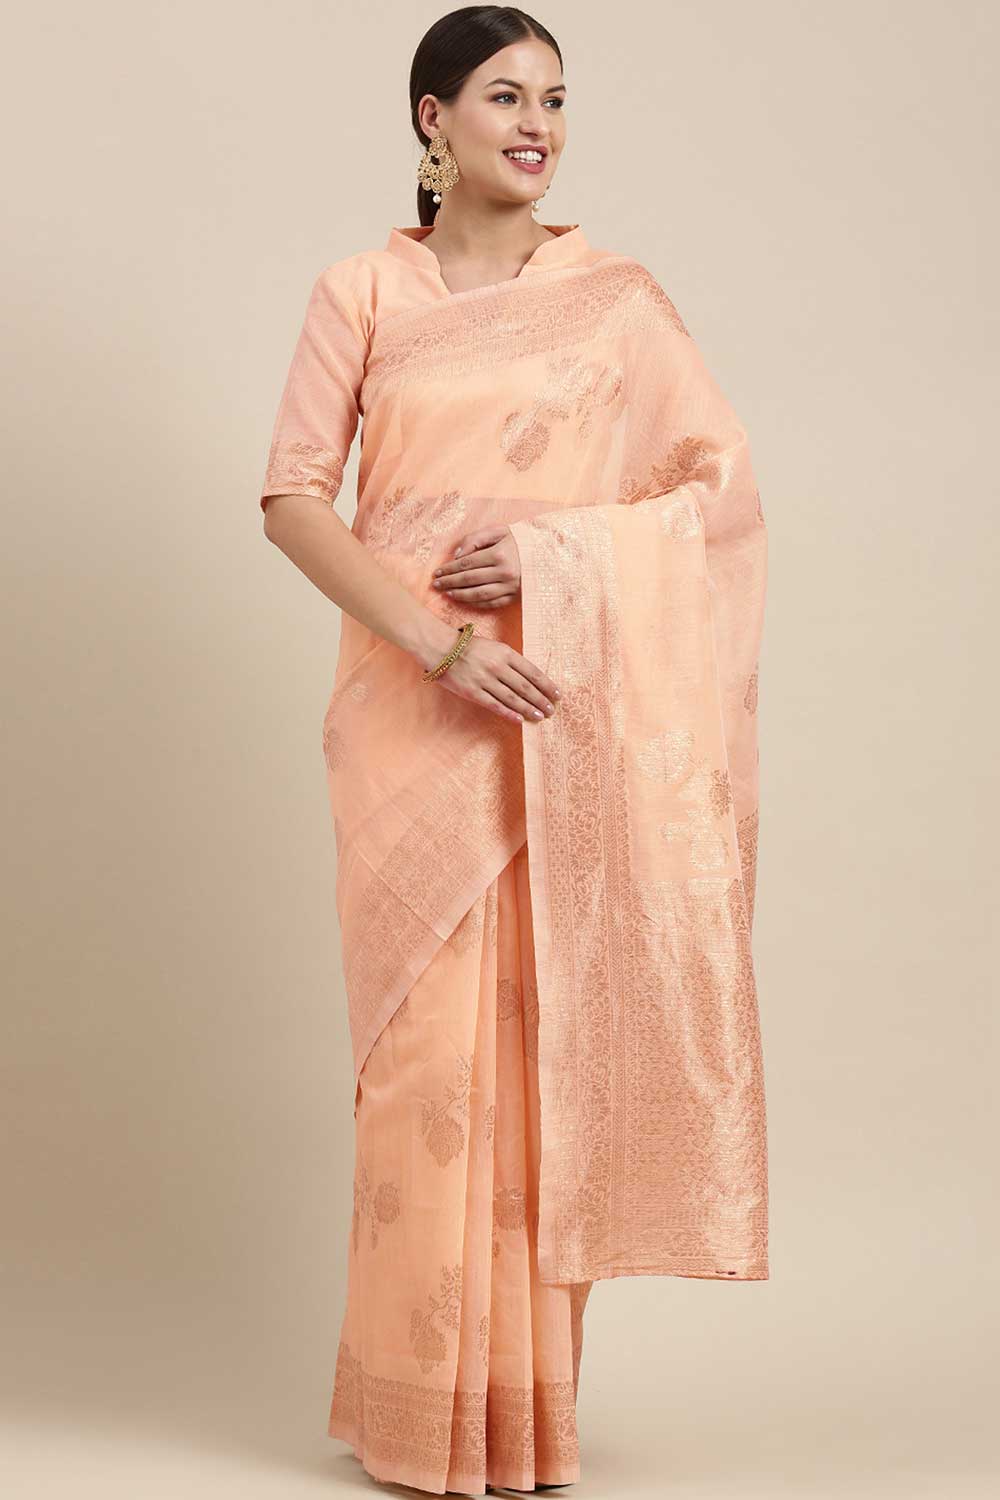 Buy Mirai Peach Floral Woven Blended Linen One Minute Saree Online